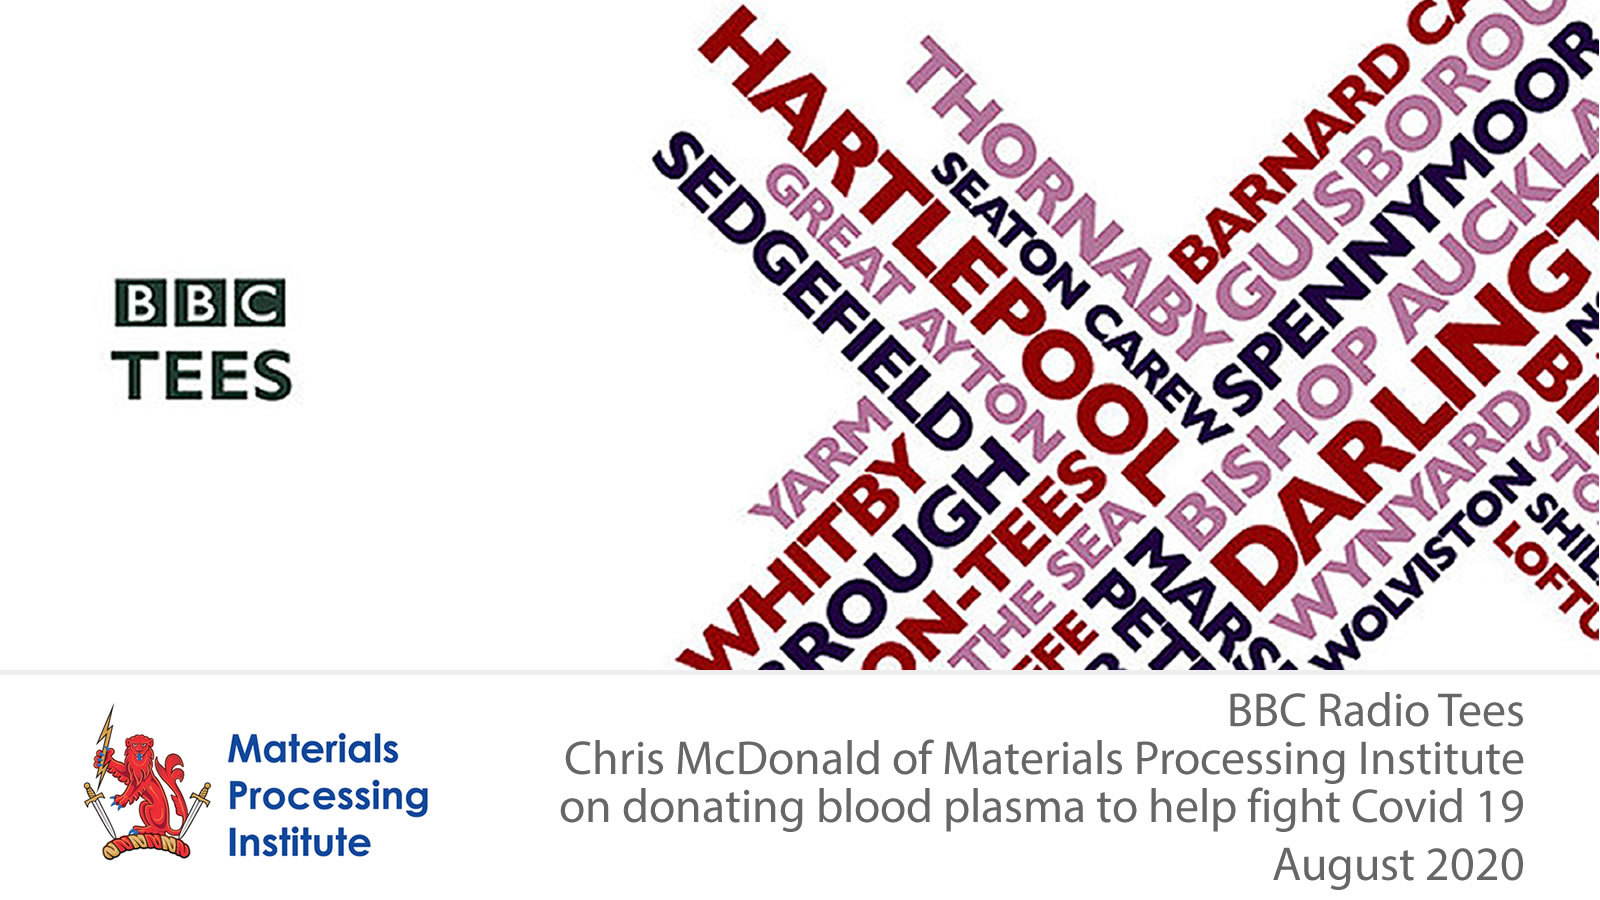 Chris McDonald of Materials Processing Institute on donating blood plasma to help fight Covid 19 - August 2020